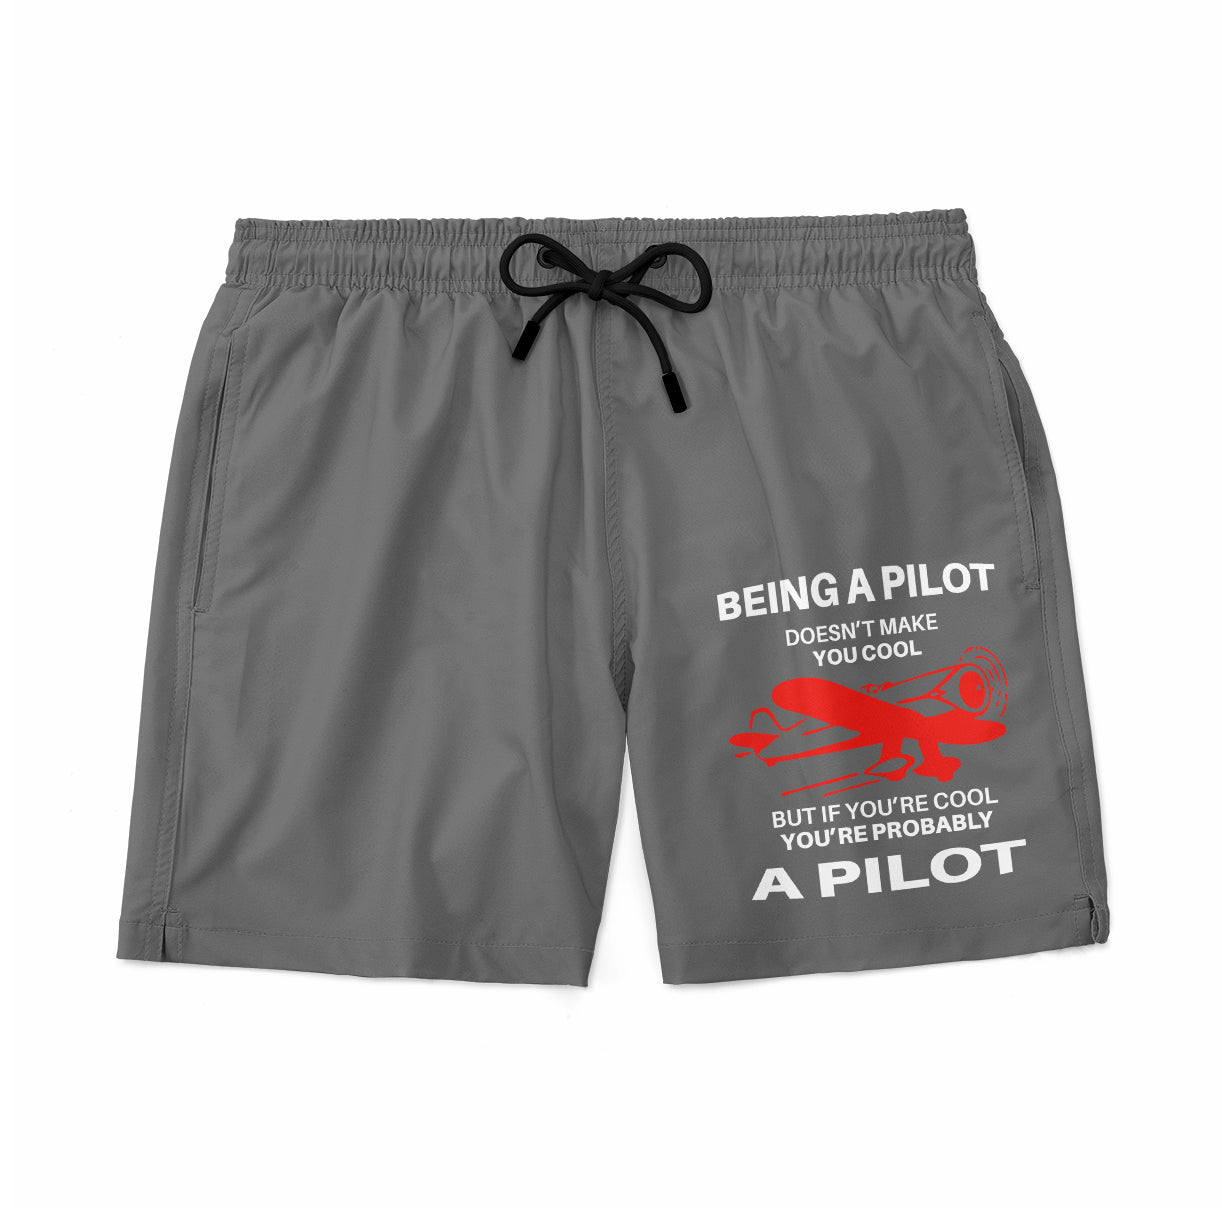 If You're Cool You're Probably a Pilot Designed Swim Trunks & Shorts